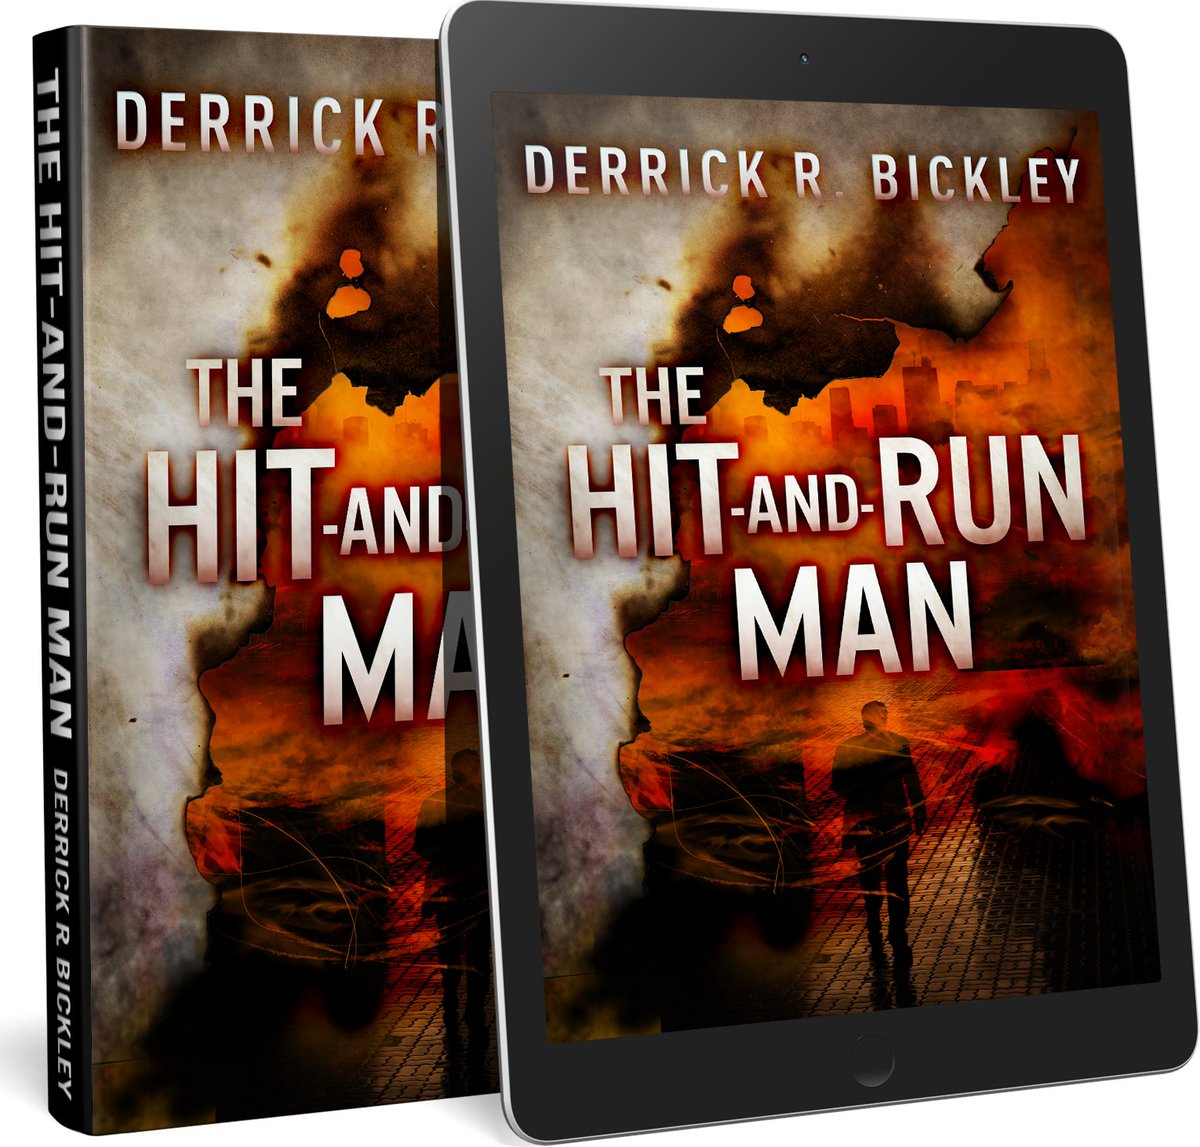 'Hard to put down' 'Good action thriller' 'Great read' mybook.to/TheHitAndRunMan FIVE/FOUR star THE HIT-AND-RUN MAN at #Kindle or your favourite digital store in PAPERBACK HARDBACK (Amzn inc L/Print B&N inc L/Print Wmart) and AUDIOBOOK #crimethriller #crime #mustread